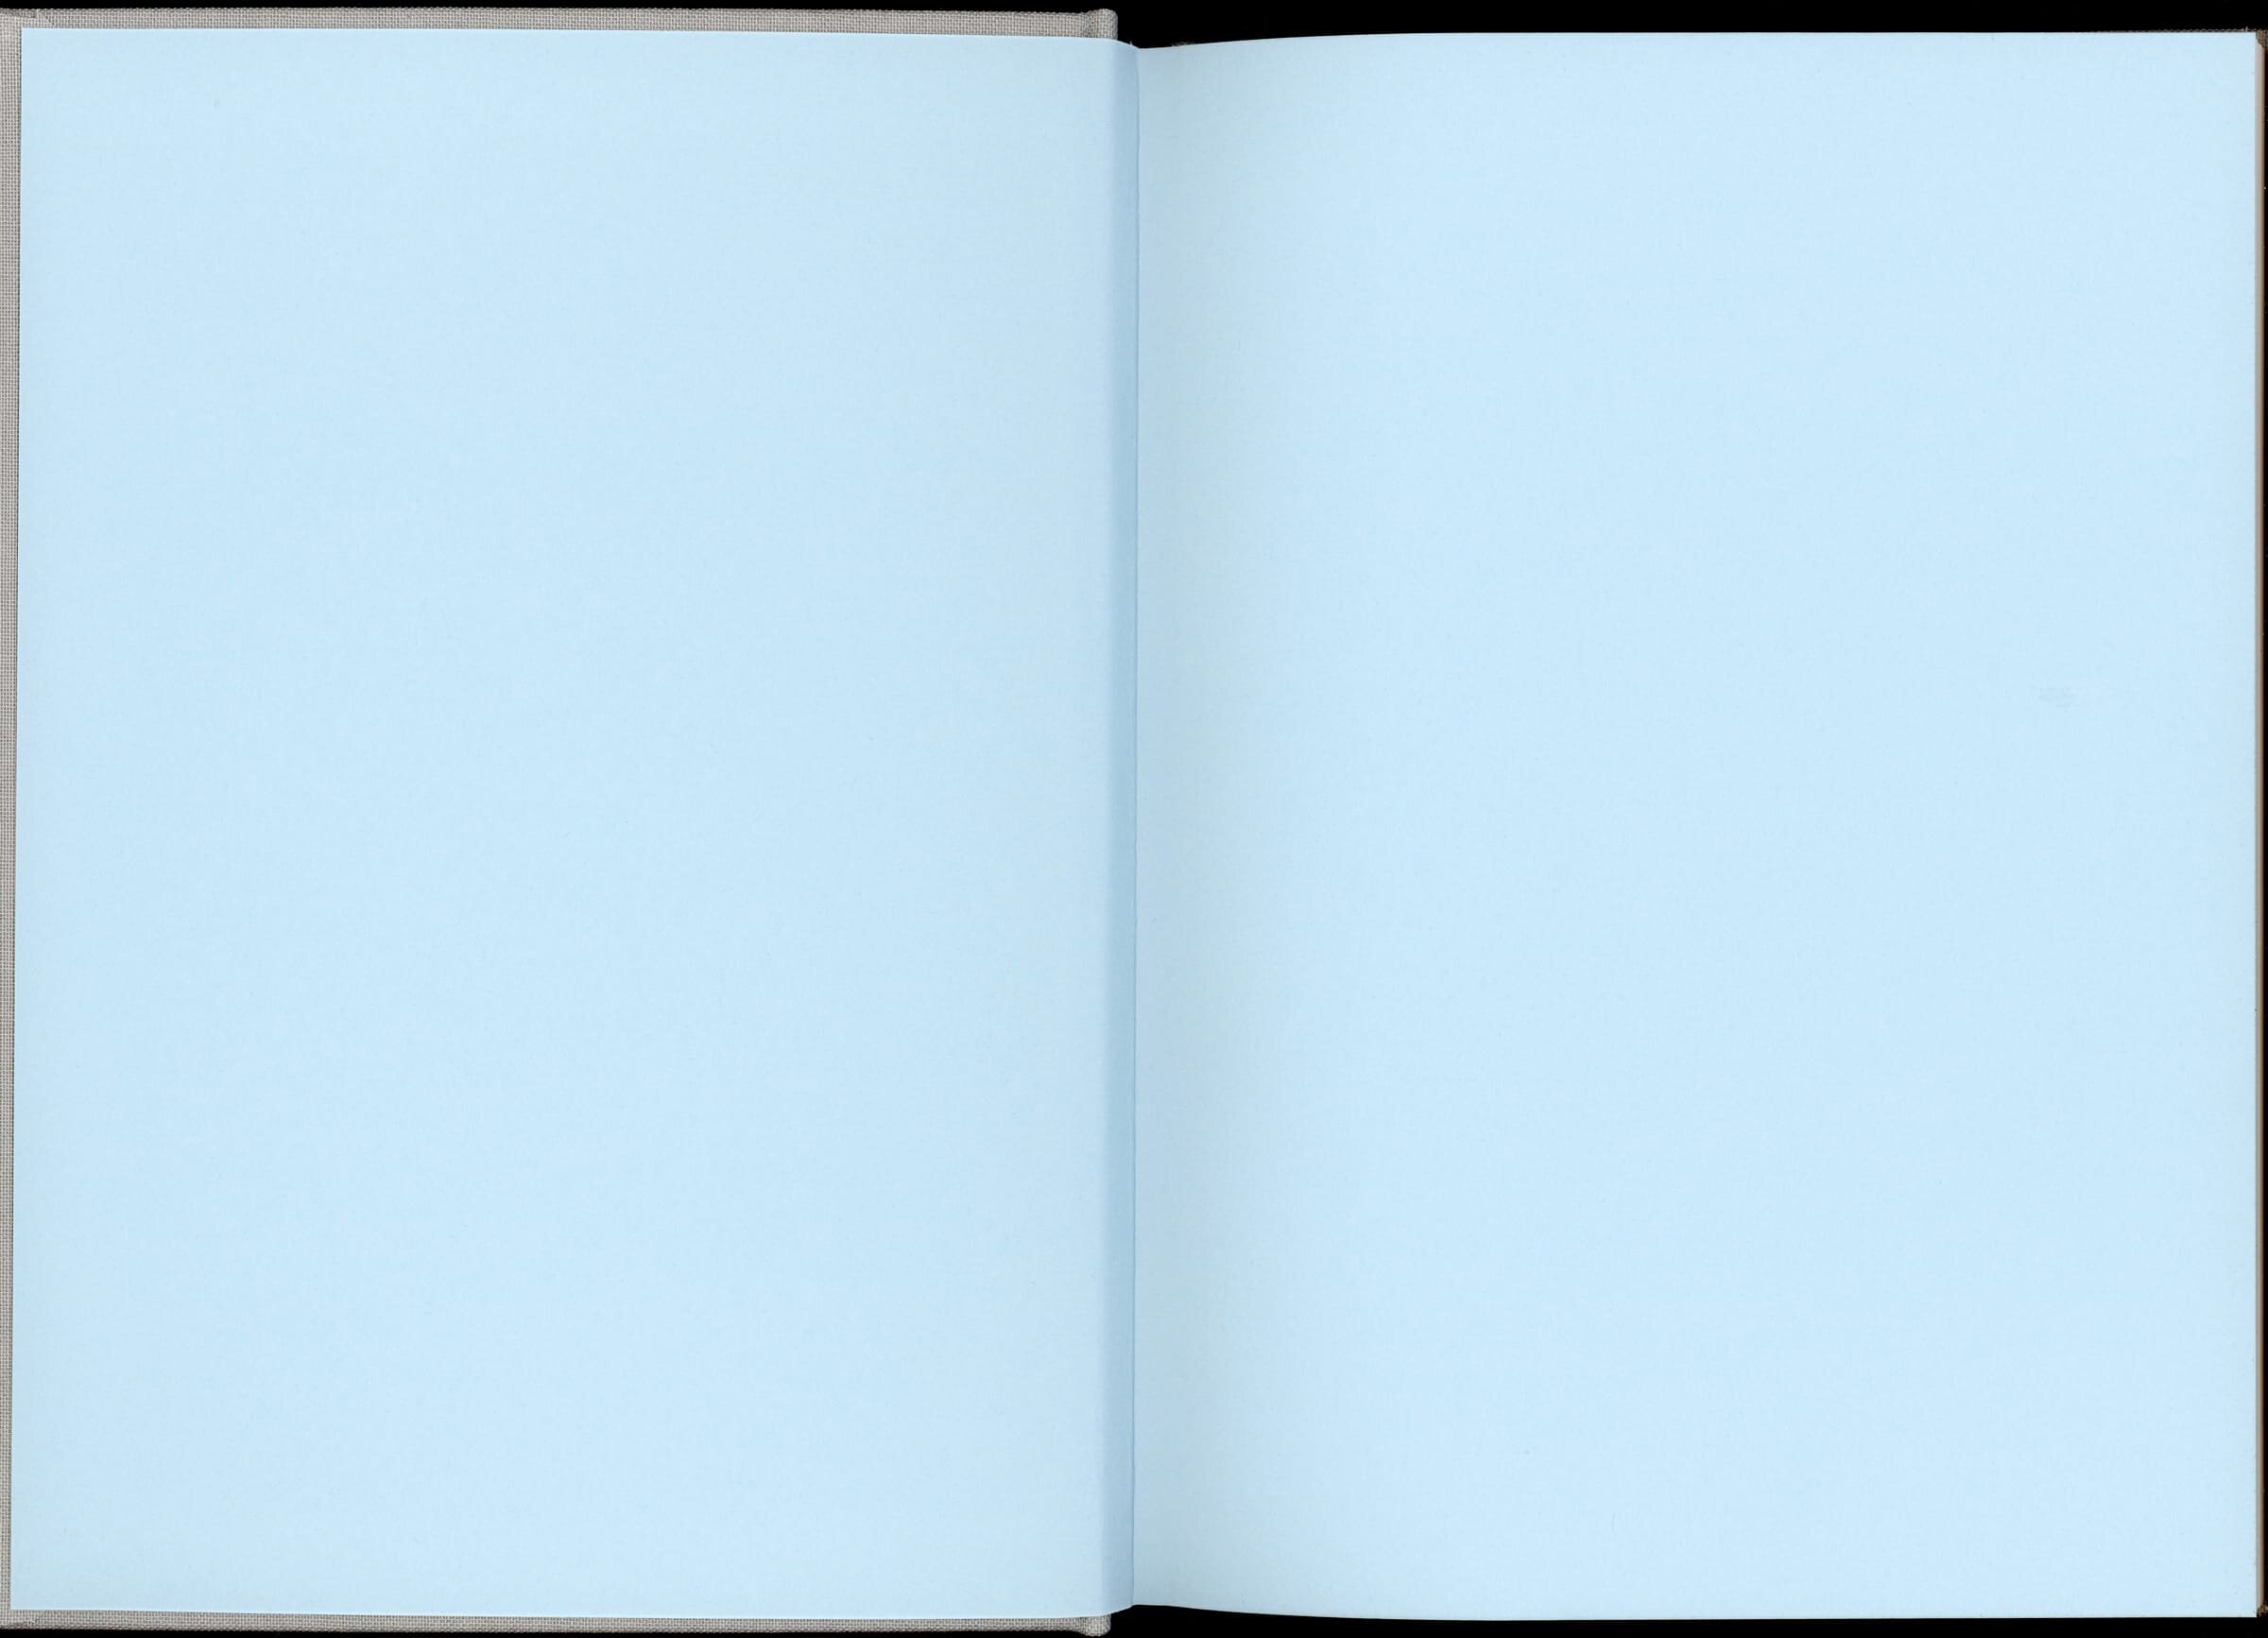 Blank book template, Free stock photos - Rgbstock - Free stock images, StariSob